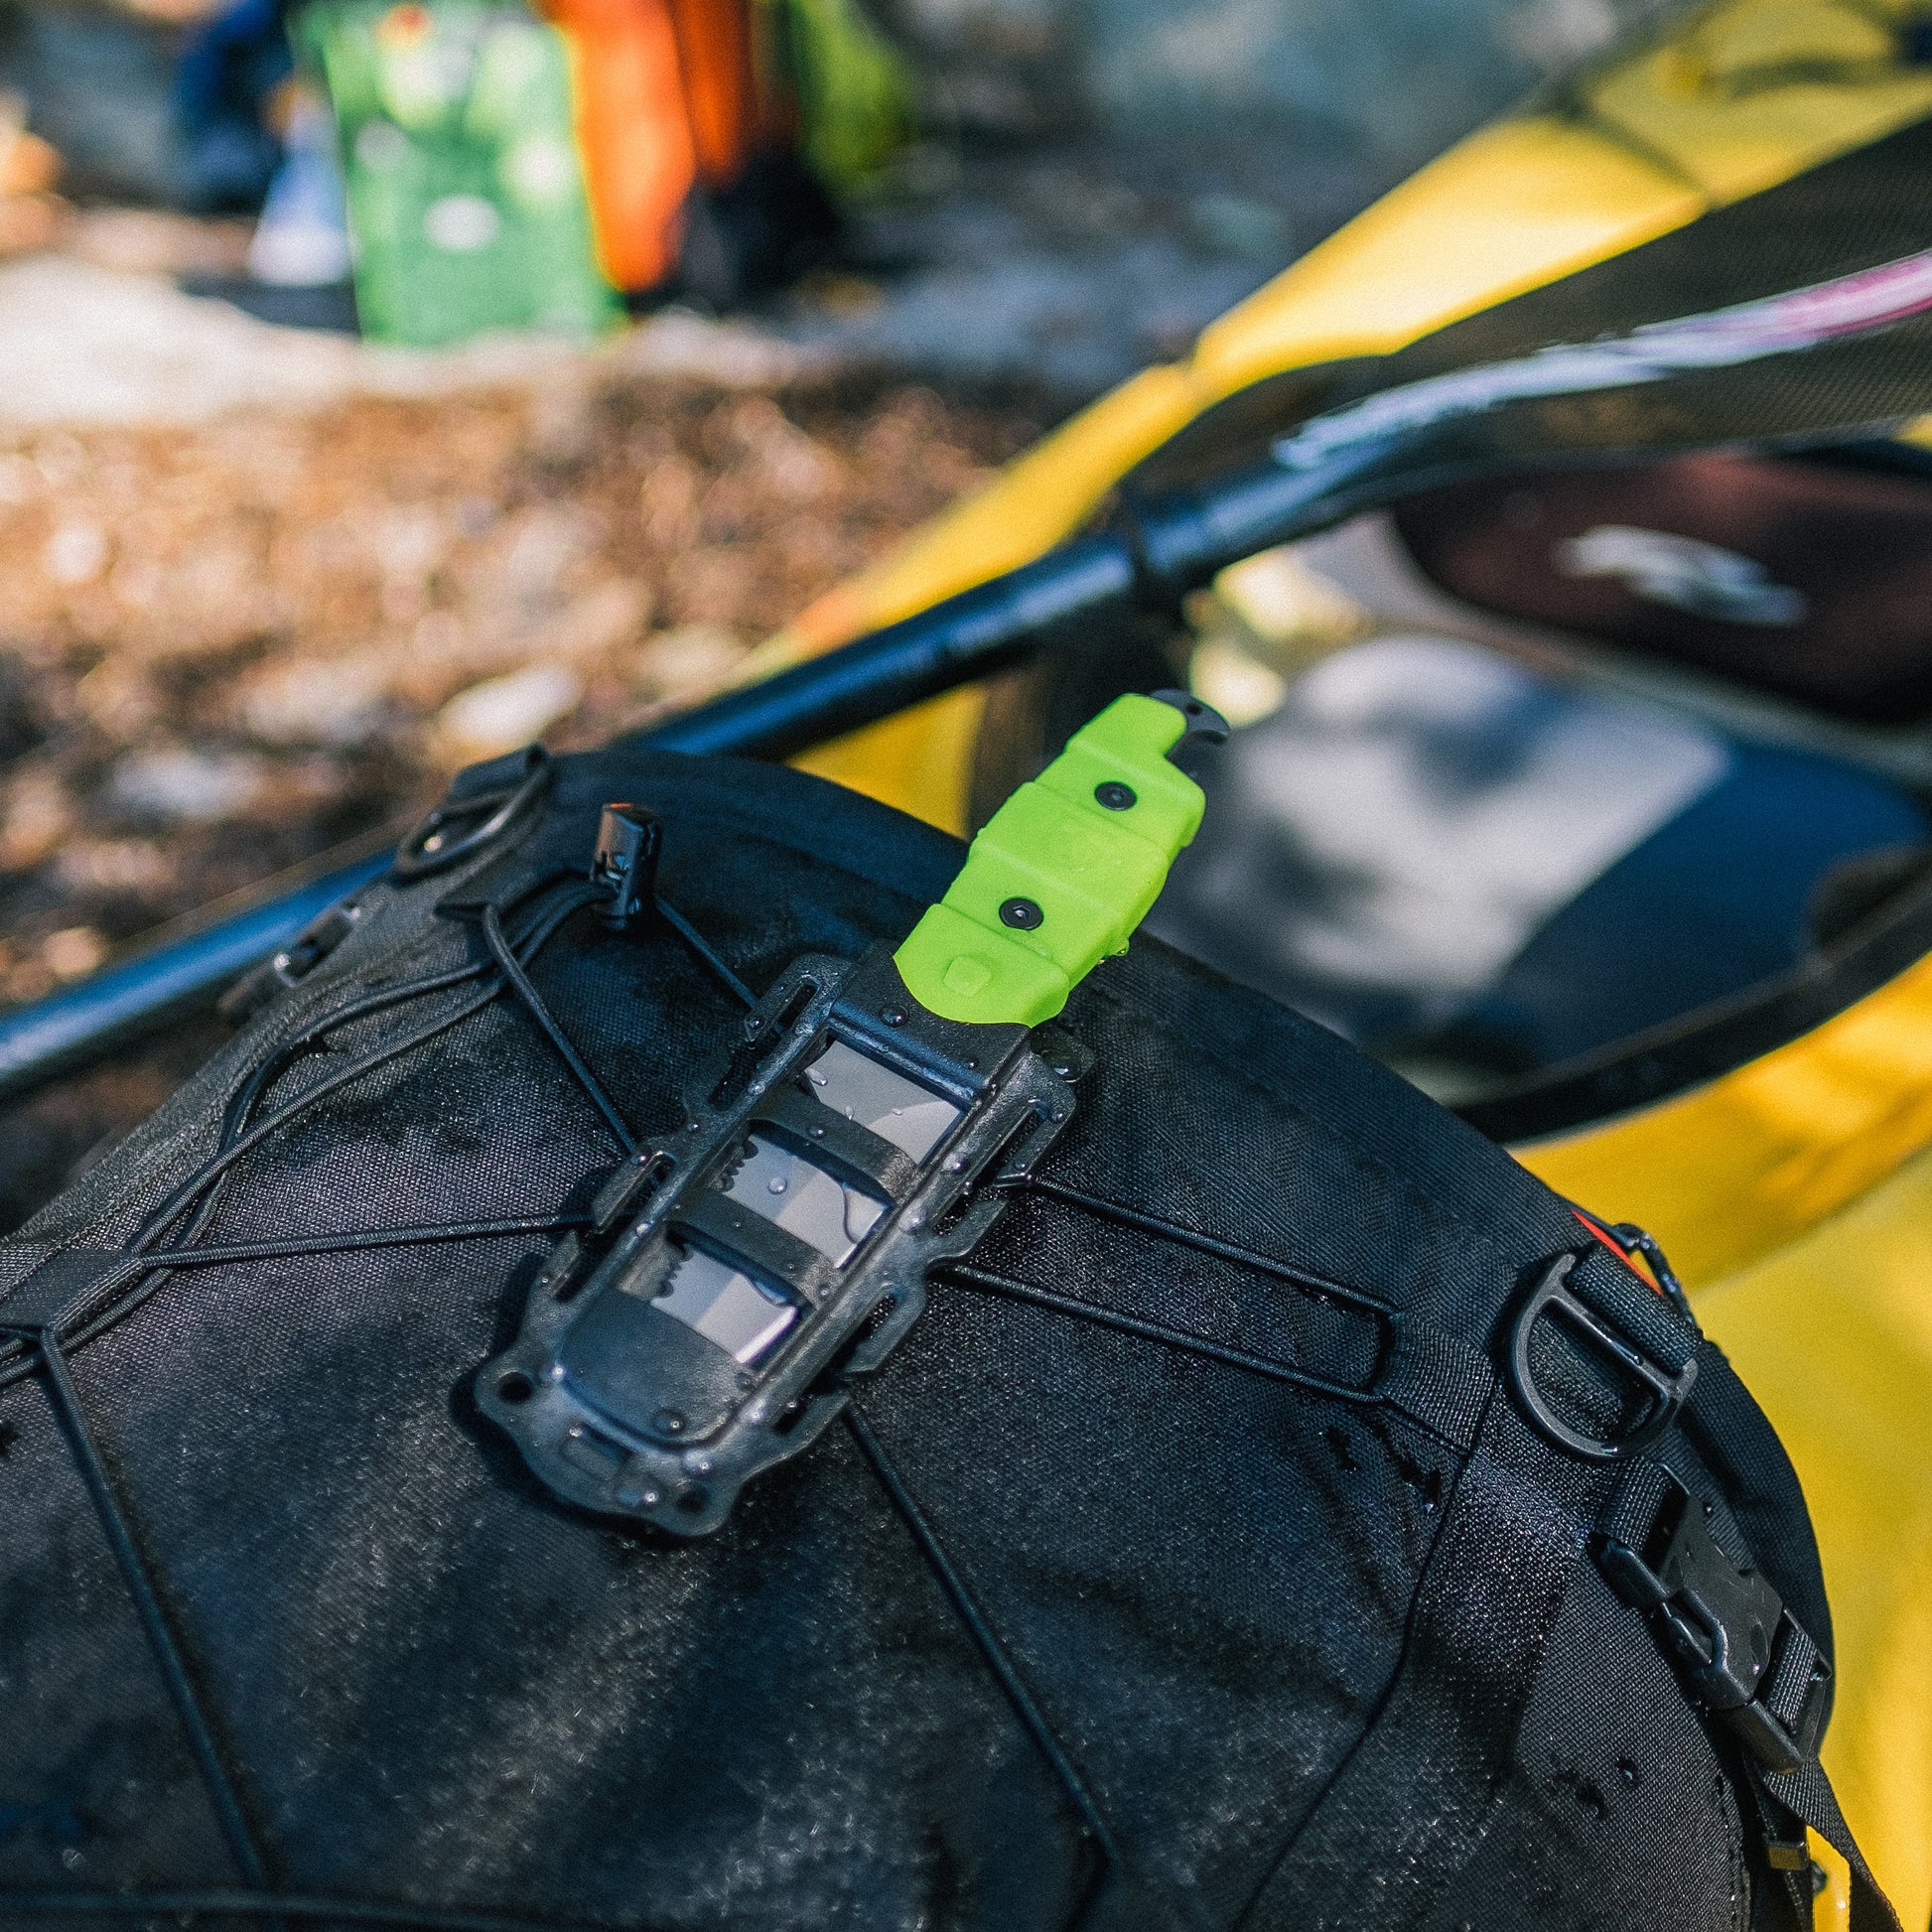 A backpack designed for freshwater adventures, equipped with the versatile and indispensable Gear Aid Akua Knife. This rescue knife is securely attached to the backpack, ensuring readiness for any emergency situations.